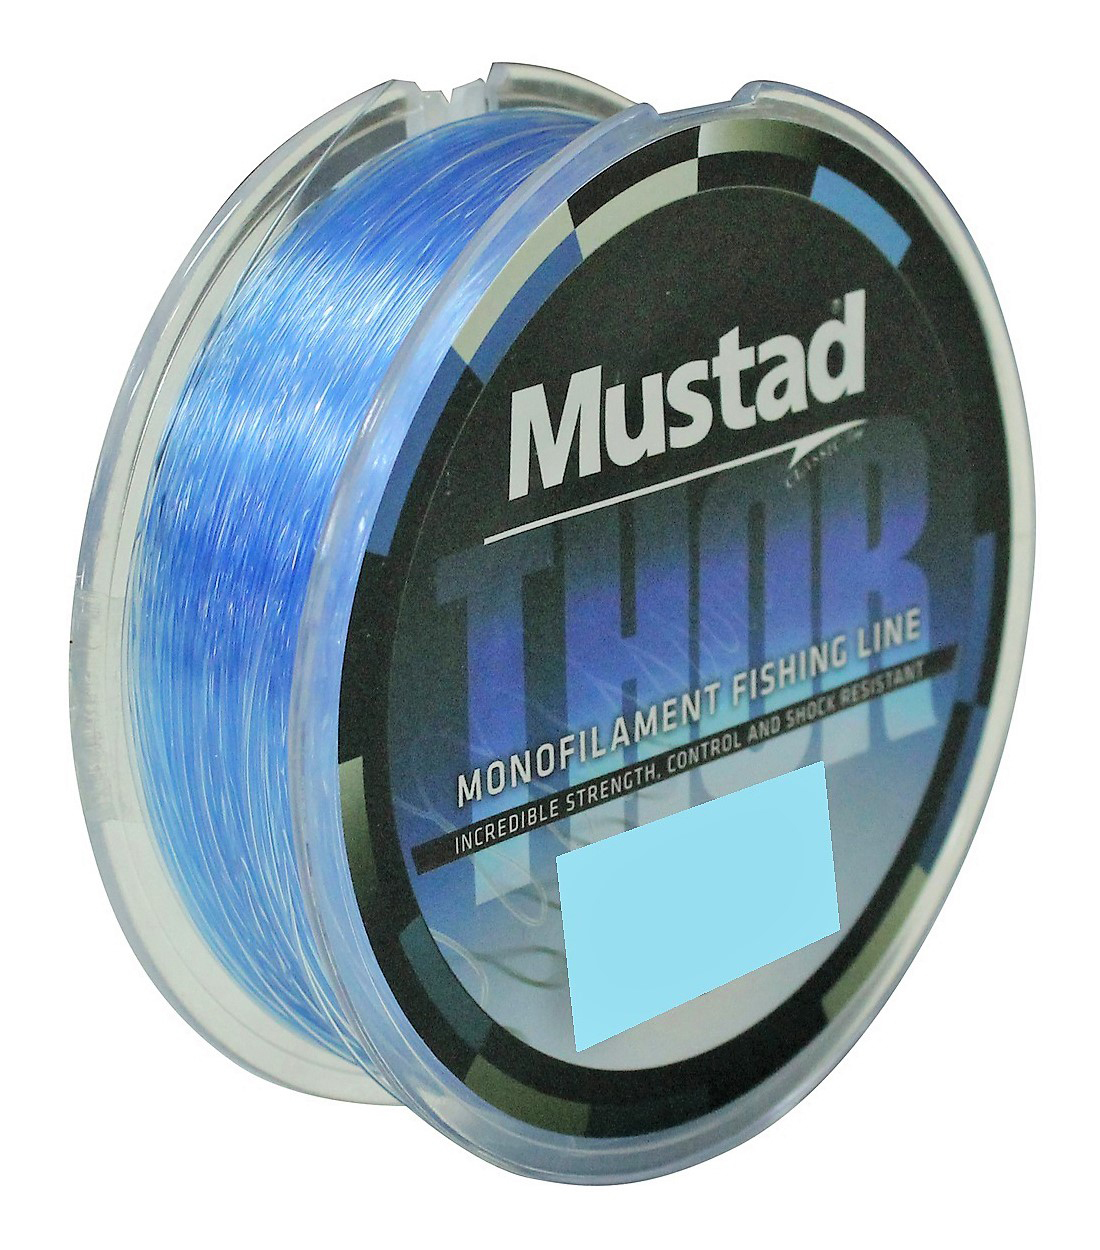 Mustad Thor Monofilament Clear Fishing Line 15 LB 795 YDS NEW SEALED